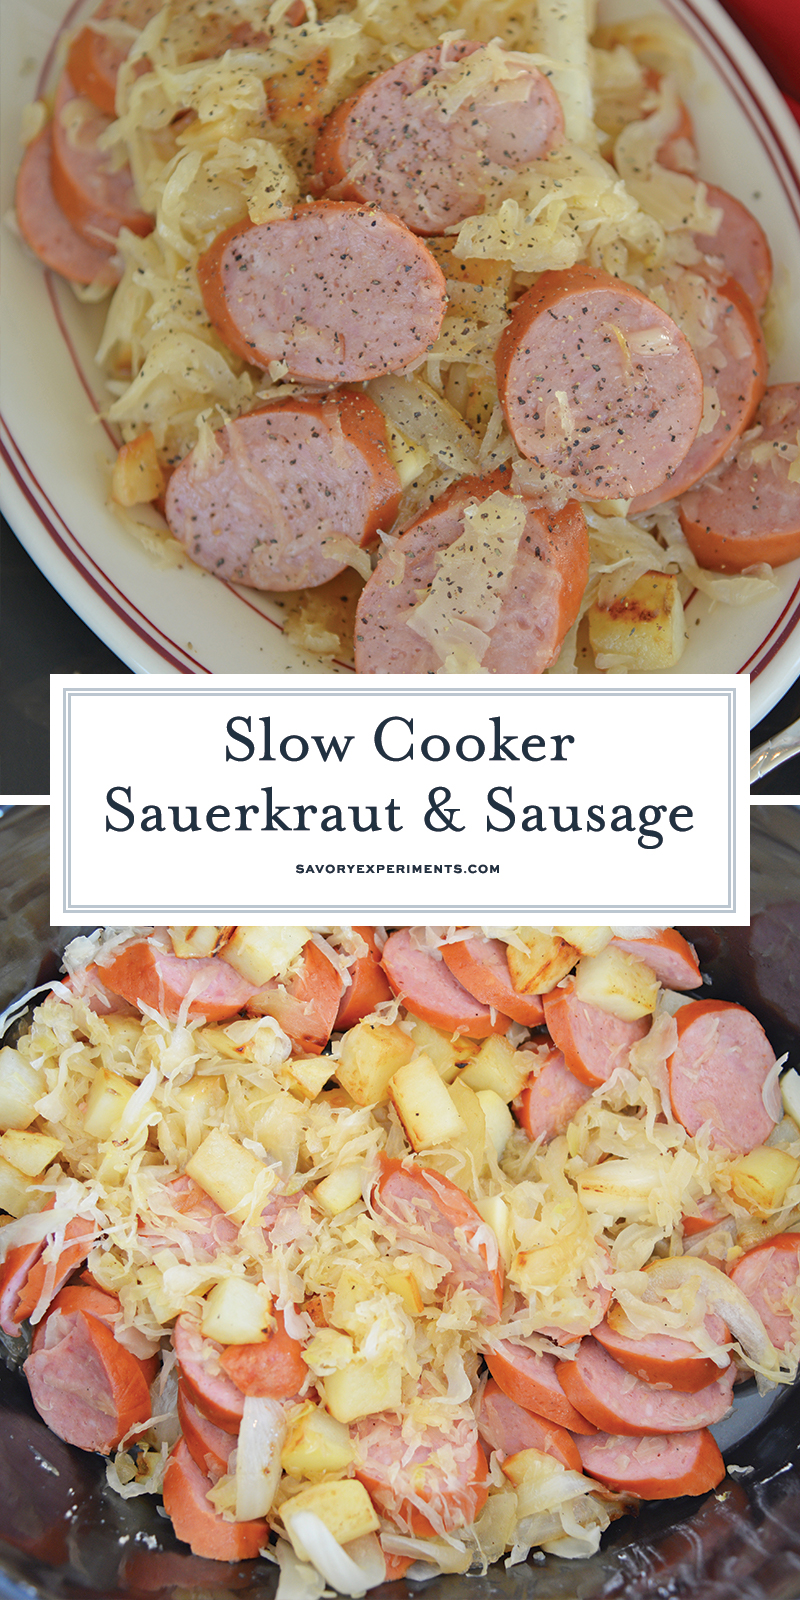 EASY Slow Cooker Sauerkraut and Sausage Recipe - Only 6 Ingredients!